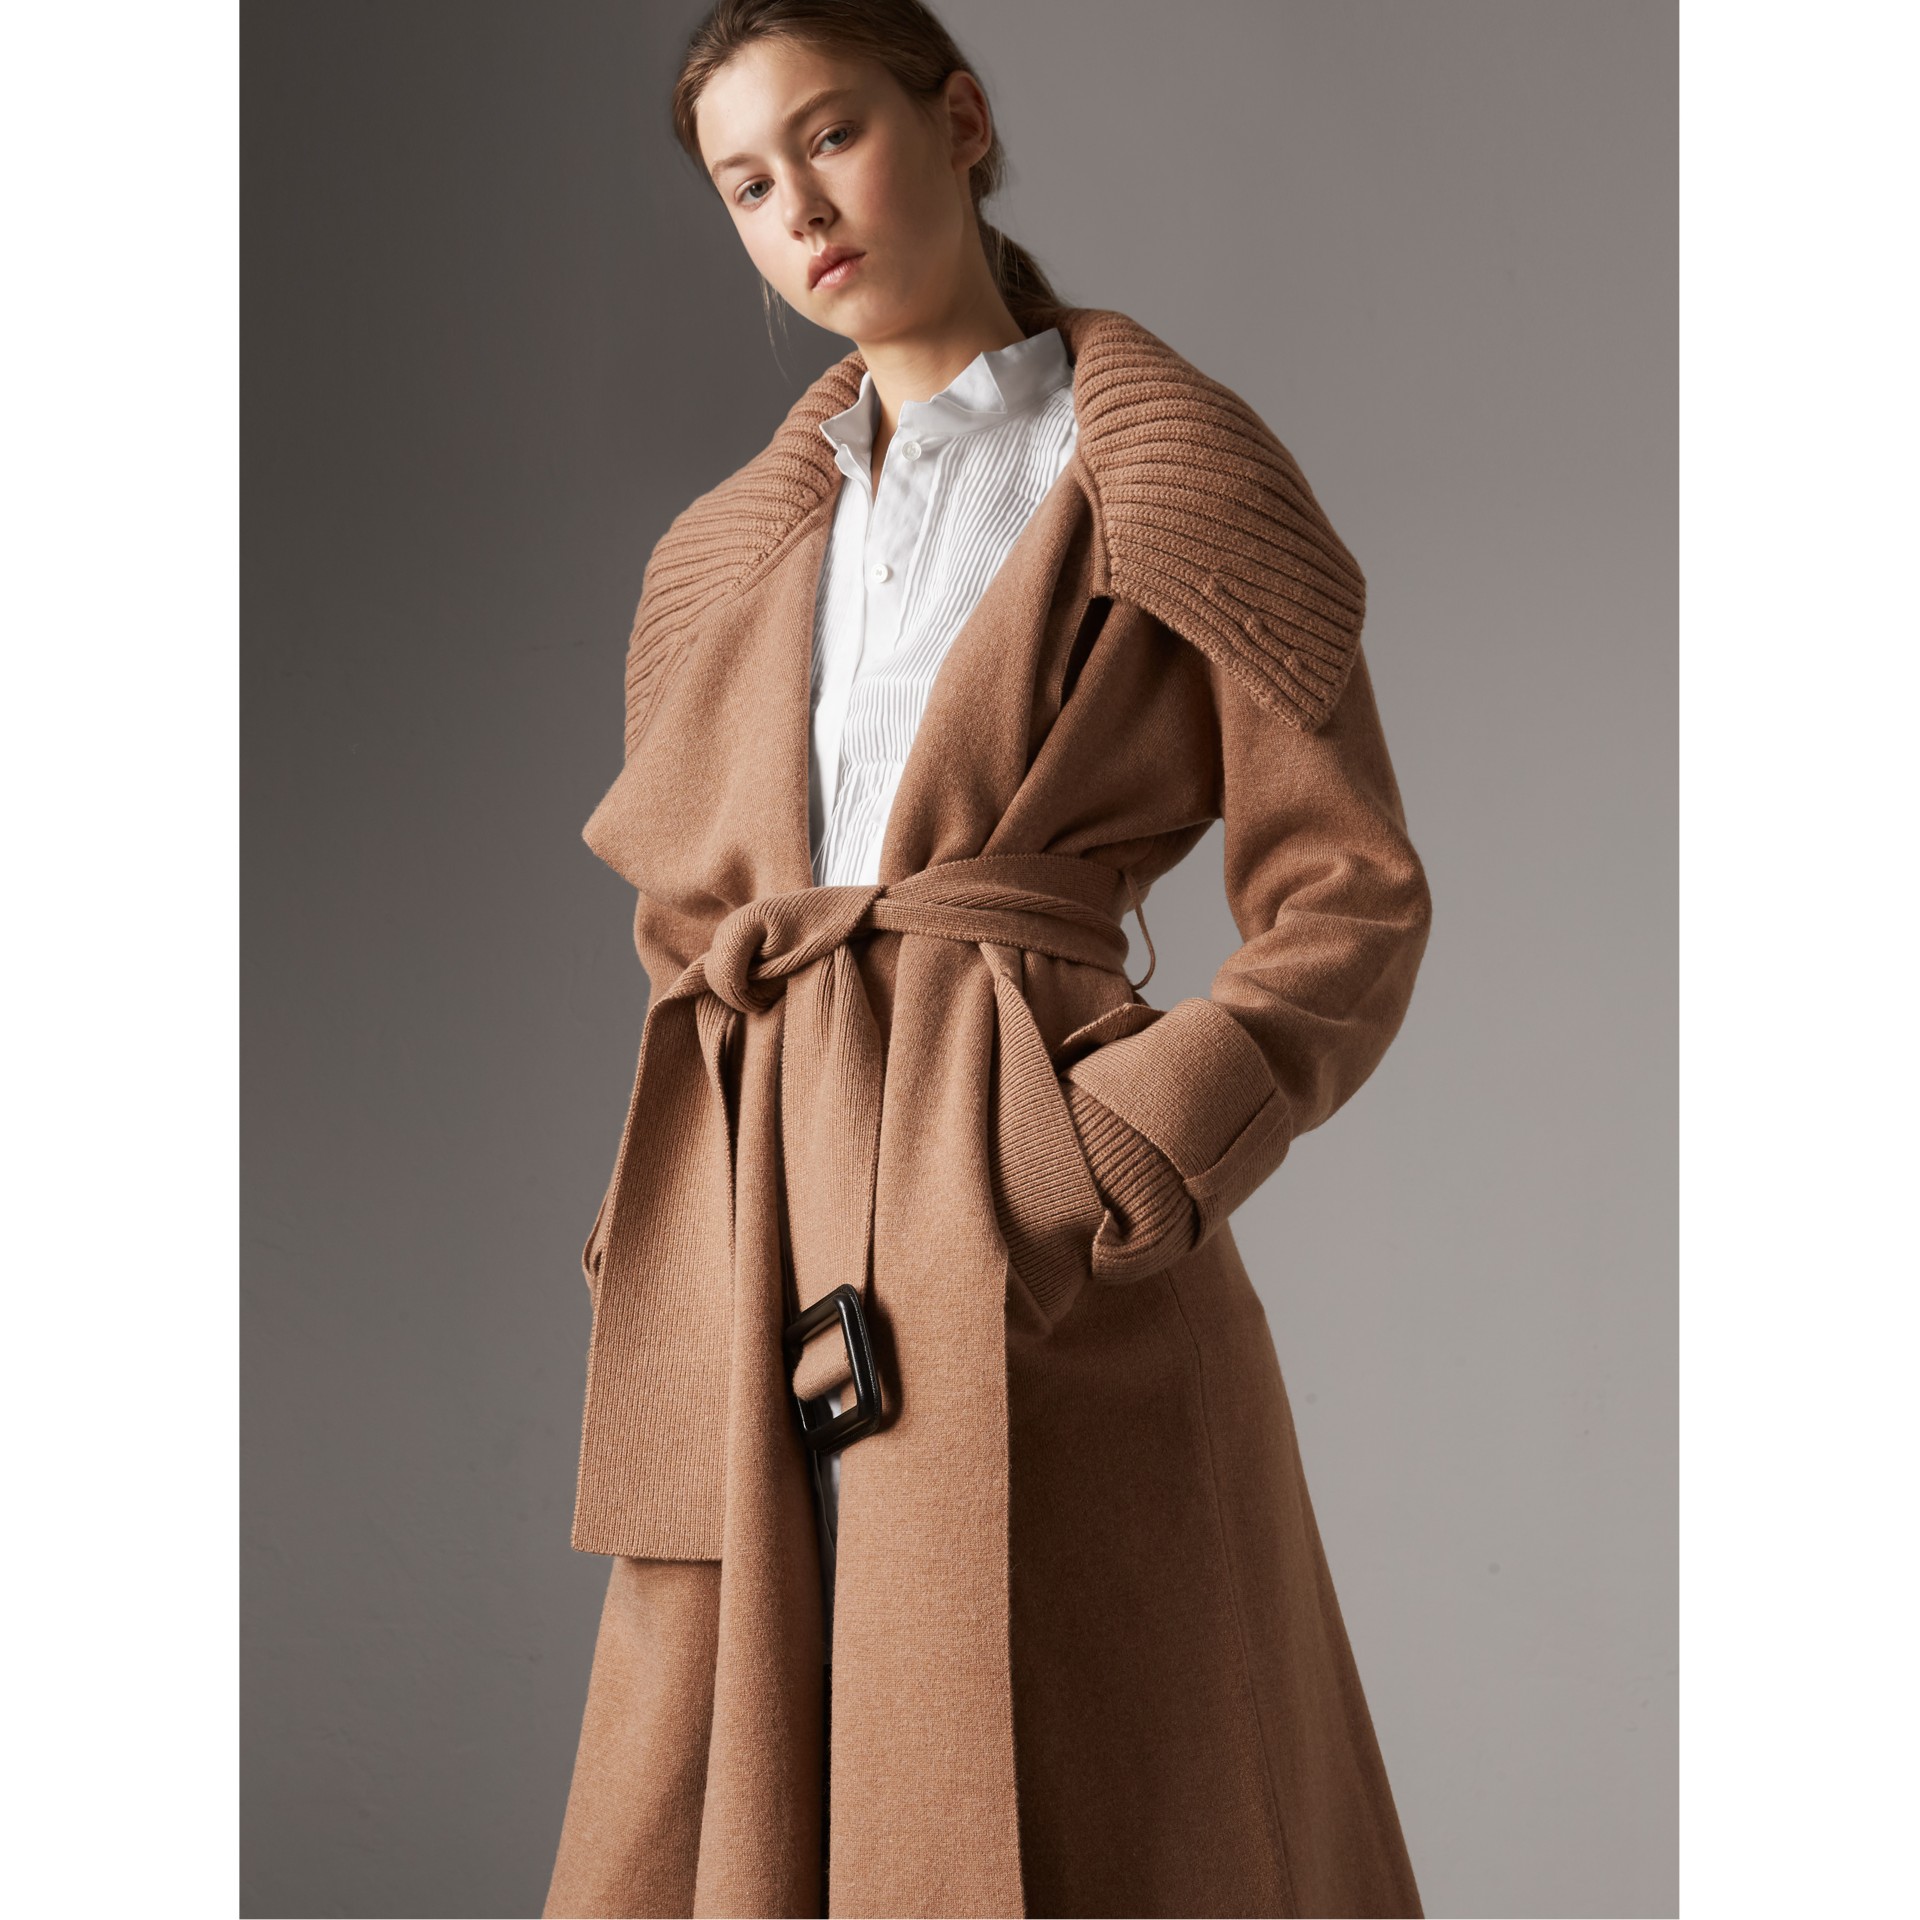 Knitted Wool Cashmere Wrap Coat in Camel - Women | Burberry United States